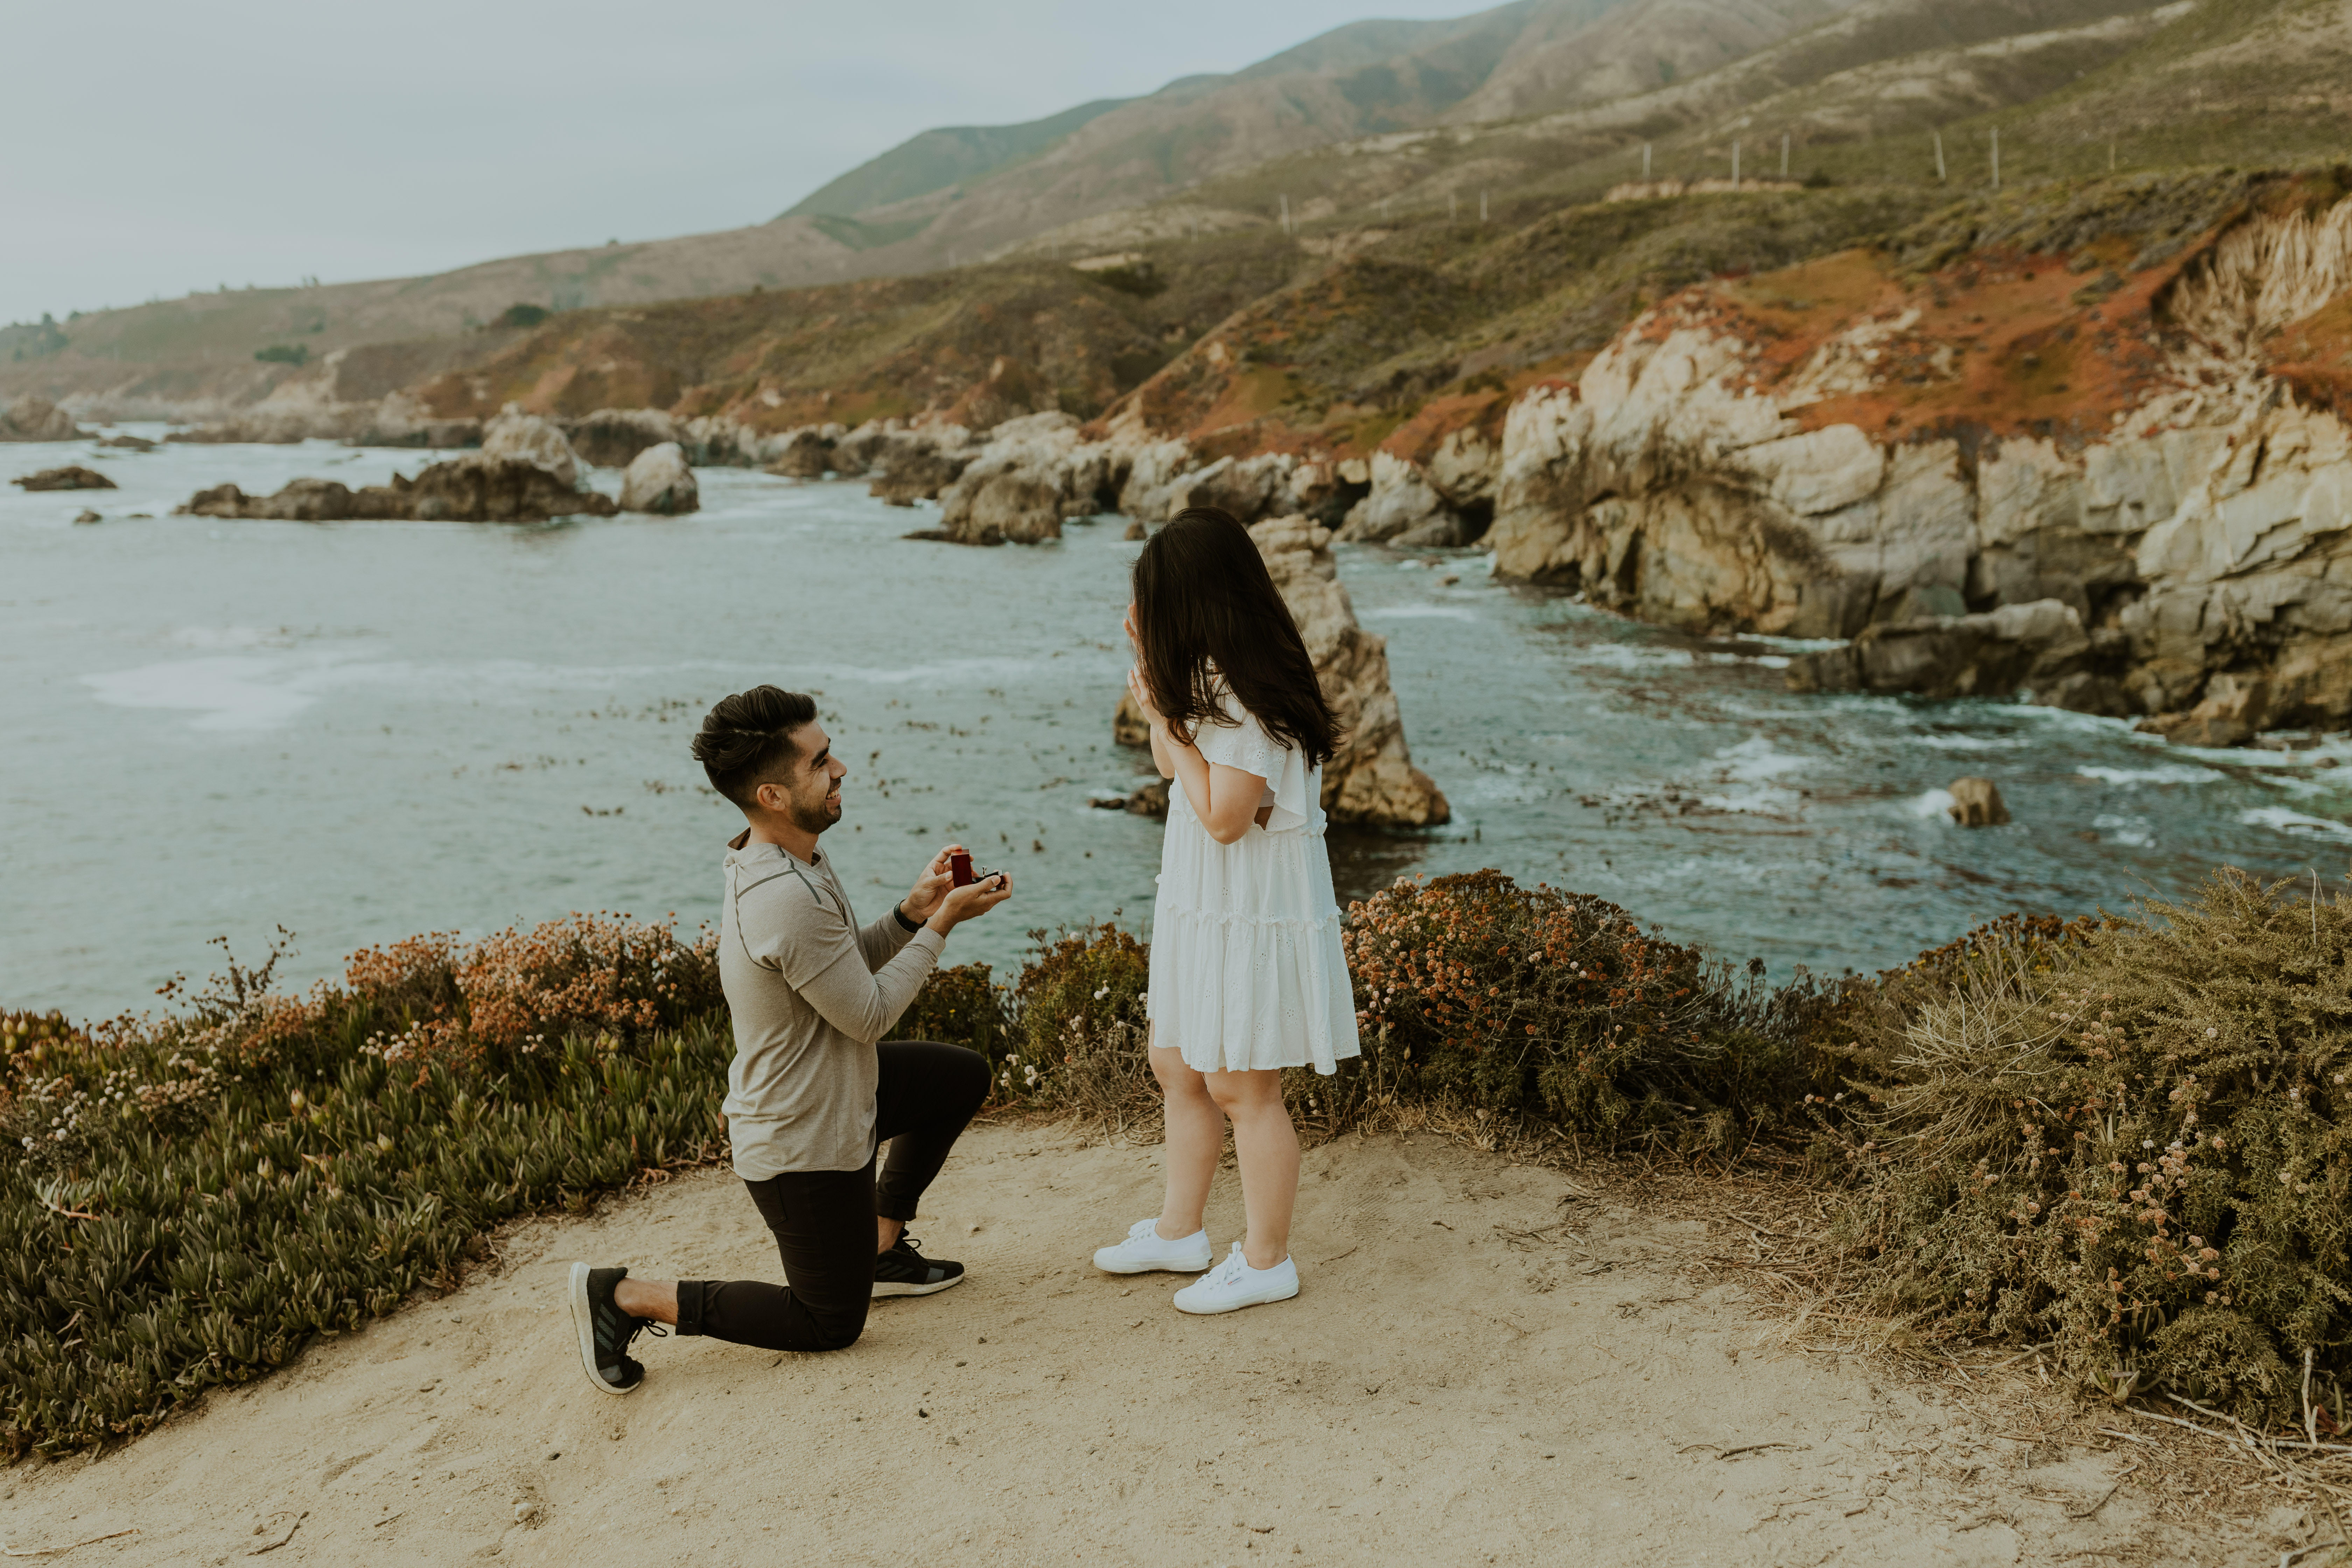 Big Sur Proposal - man on one knee with ring proposing to his girlfriend.